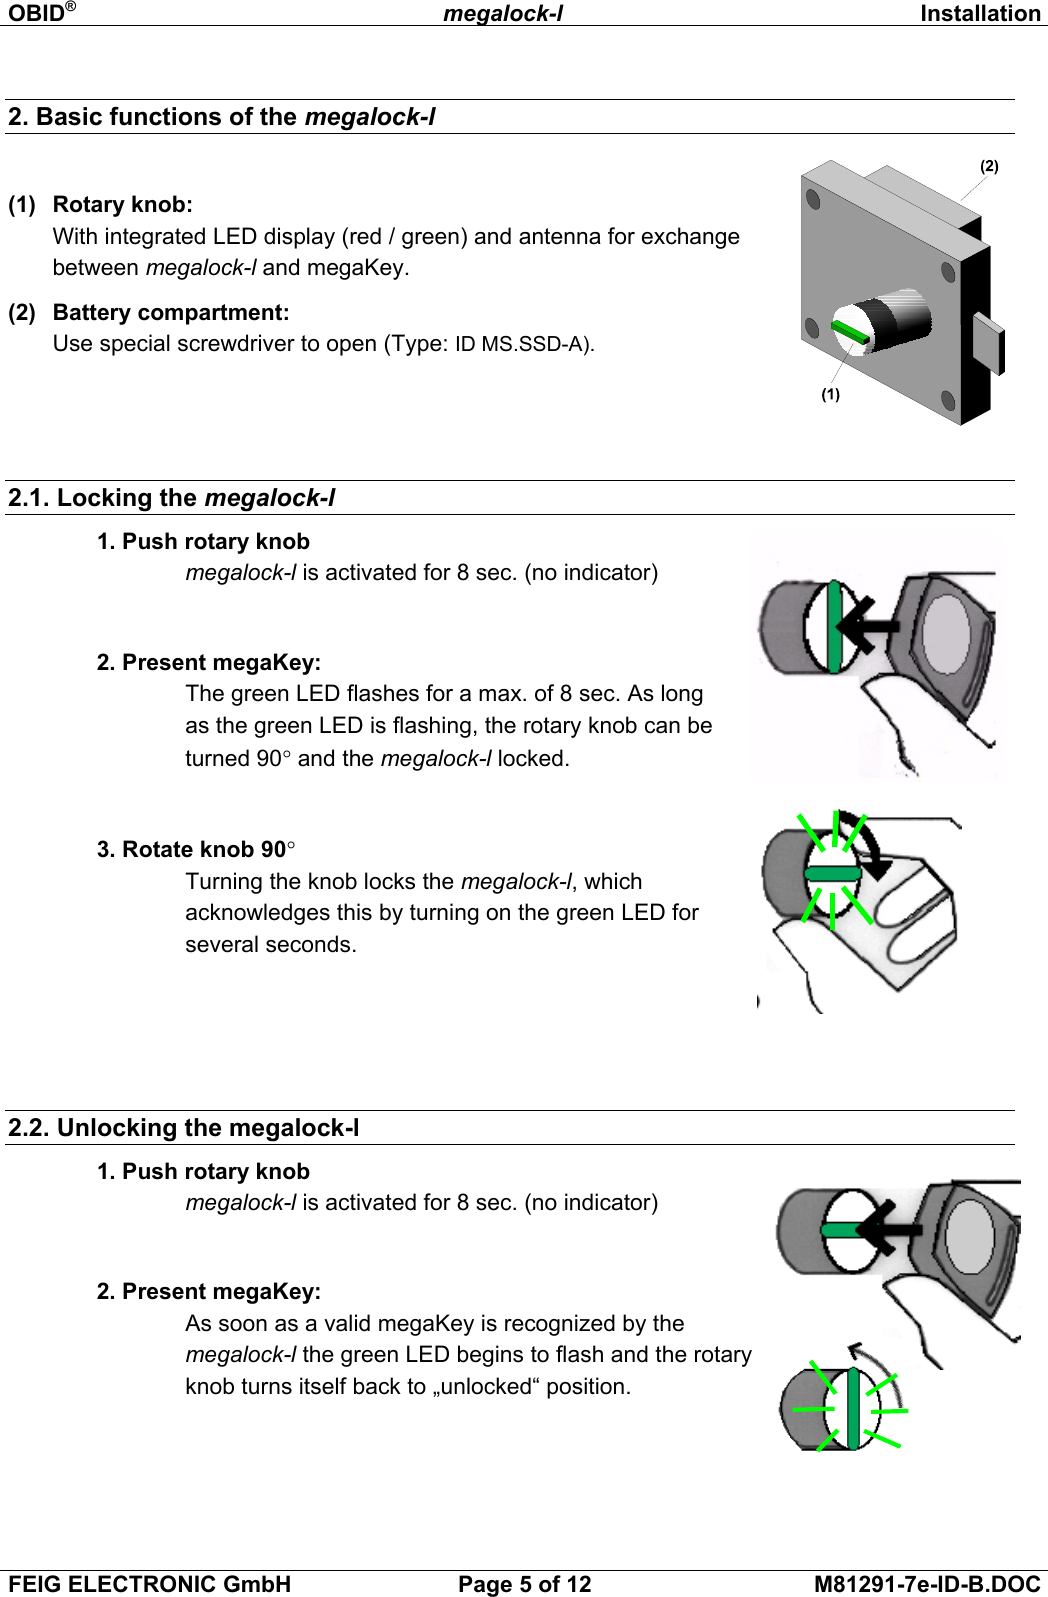 OBID®megalock-l InstallationFEIG ELECTRONIC GmbH Page 5 of 12 M81291-7e-ID-B.DOC2. Basic functions of the megalock-l(1)  Rotary knob:With integrated LED display (red / green) and antenna for exchangebetween megalock-l and megaKey.(2)  Battery compartment:Use special screwdriver to open (Type: ID MS.SSD-A).    2.1. Locking the megalock-l 1. Push rotary knobmegalock-l is activated for 8 sec. (no indicator)2. Present megaKey:The green LED flashes for a max. of 8 sec. As longas the green LED is flashing, the rotary knob can beturned 90° and the megalock-l locked.3. Rotate knob 90°Turning the knob locks the megalock-l, whichacknowledges this by turning on the green LED forseveral seconds.2.2. Unlocking the megalock-l 1. Push rotary knobmegalock-l is activated for 8 sec. (no indicator)2. Present megaKey:As soon as a valid megaKey is recognized by themegalock-l the green LED begins to flash and the rotaryknob turns itself back to „unlocked“ position.